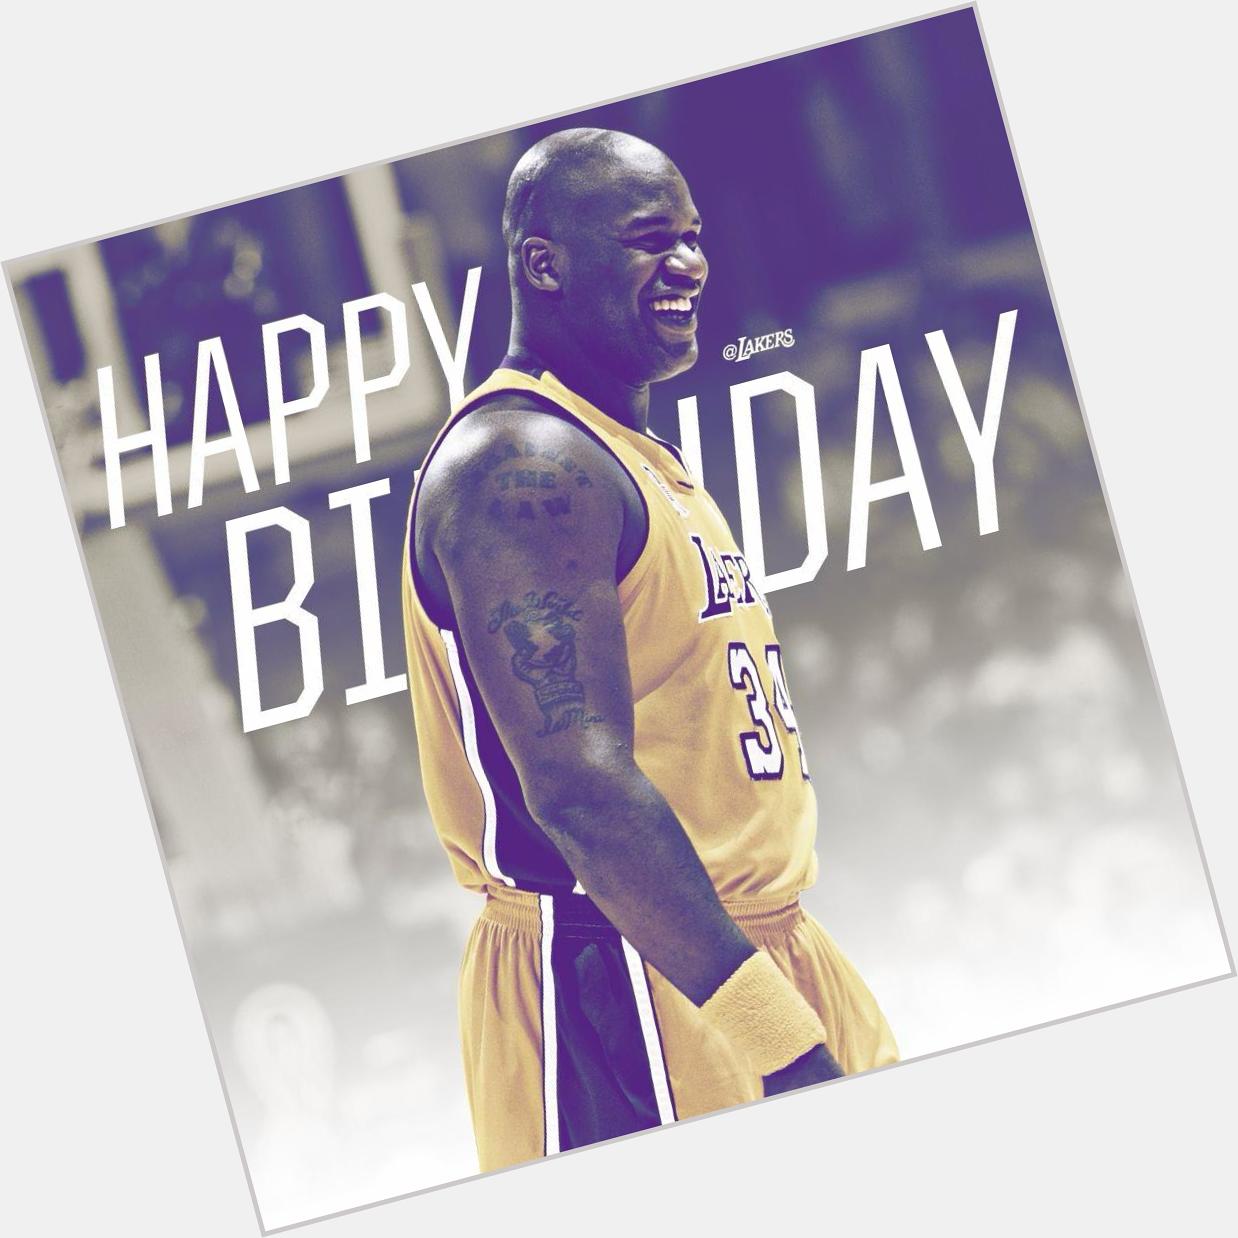 Happy birthday motivation,happy birthday fat legend of all time,HAPPY BIRTHDAY SHAQUILLE O\NEAL 